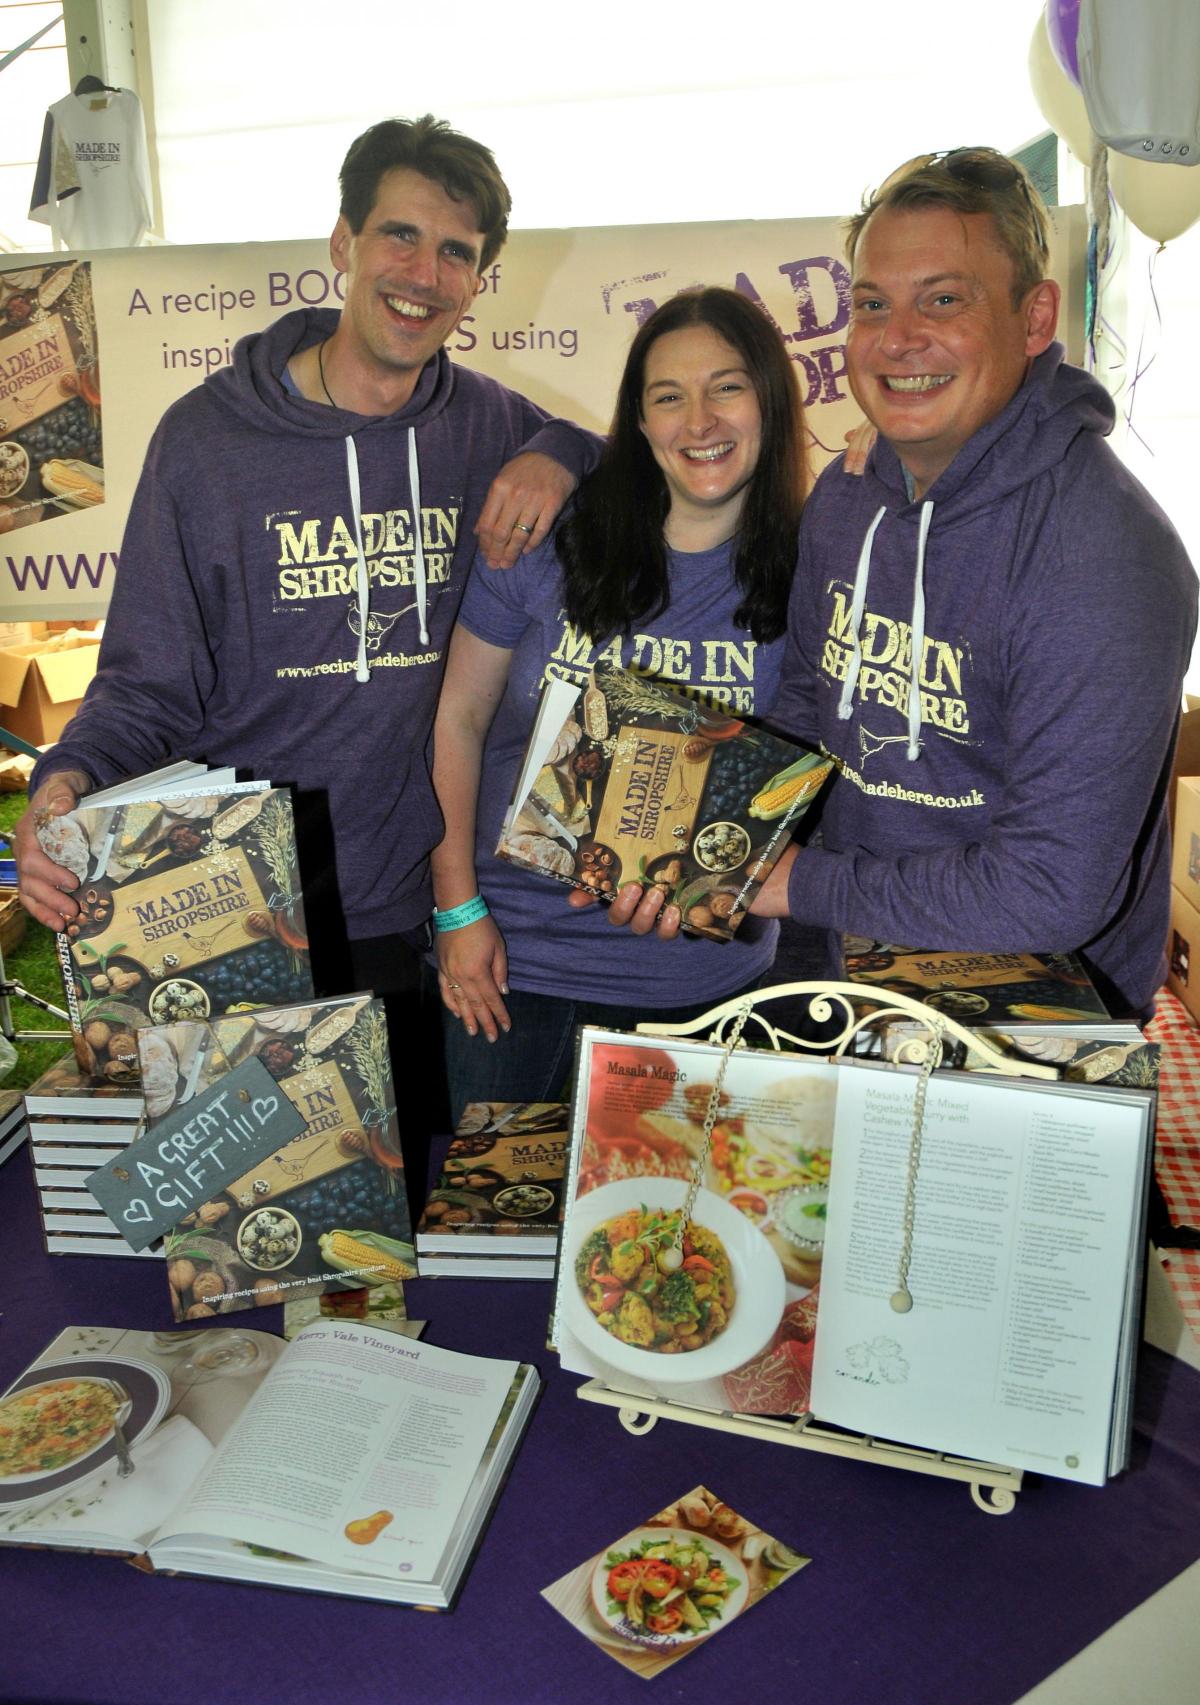 The ' Made in Shropshire' cook book proved popular at Ludlow Food Festival to the delight of publishers Simon Wild and Becca Wild of Photopia Photography and Patrick Barrett of P and R Design.